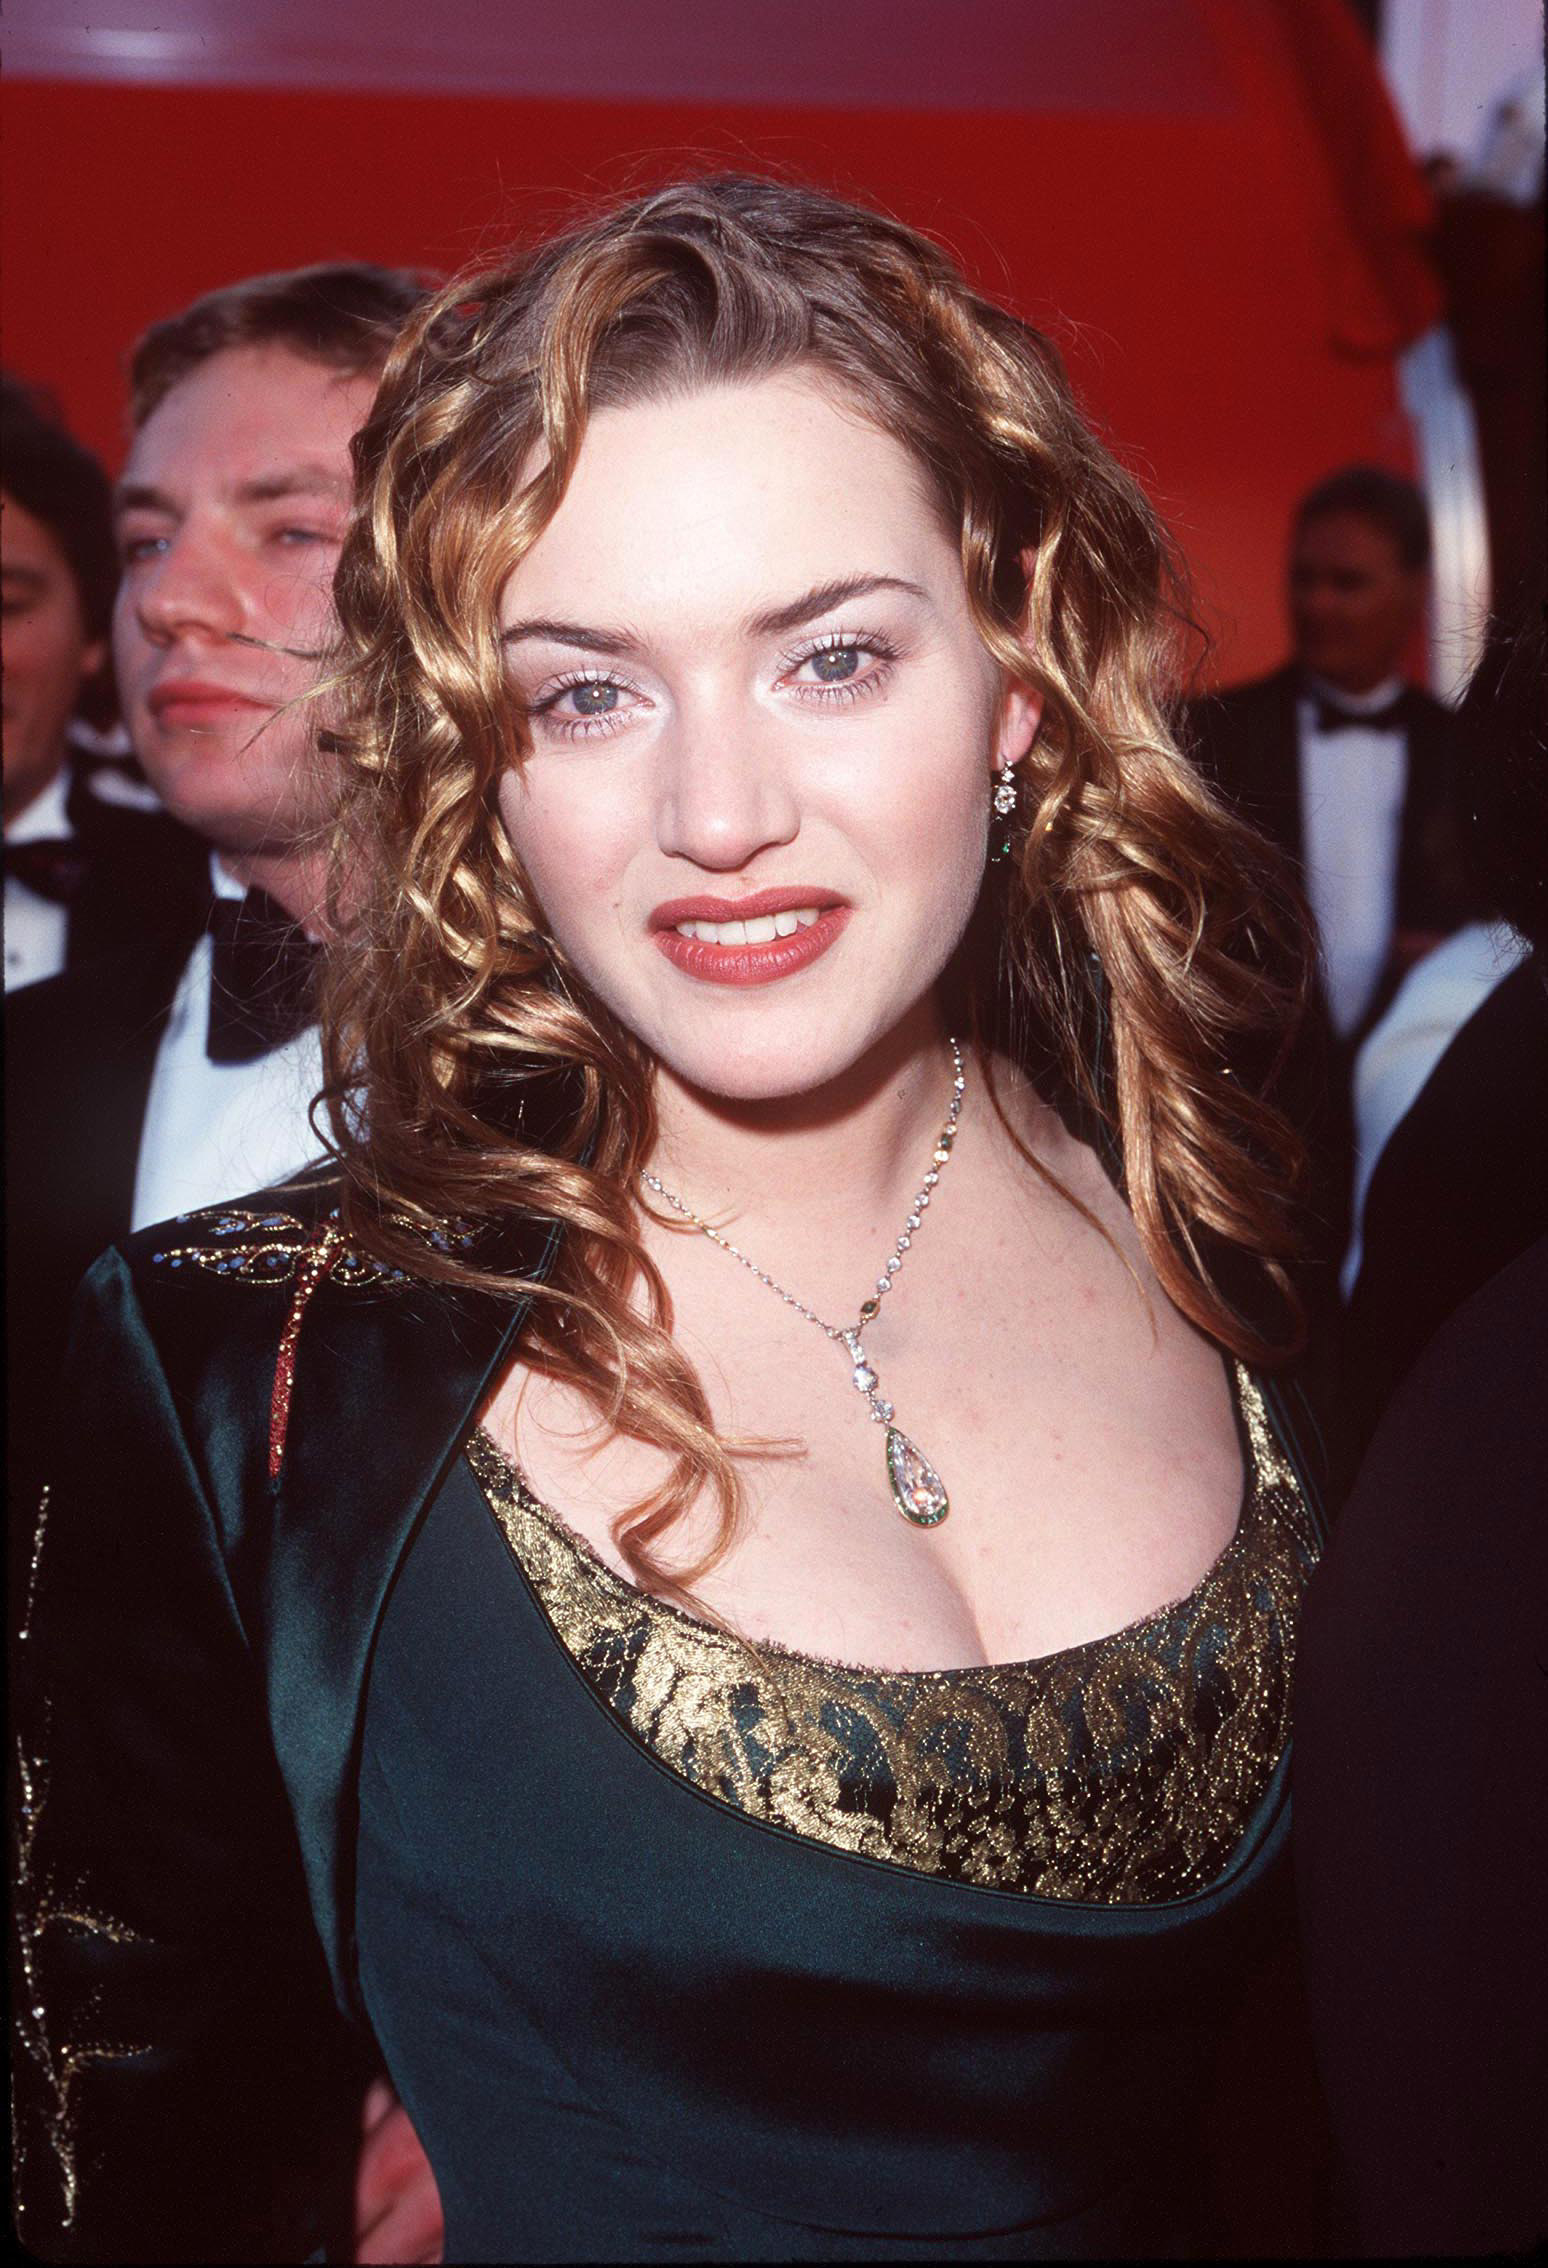 besejret Isolere rester Kate Winslet On Titanic Door And People Criticising Her Weight